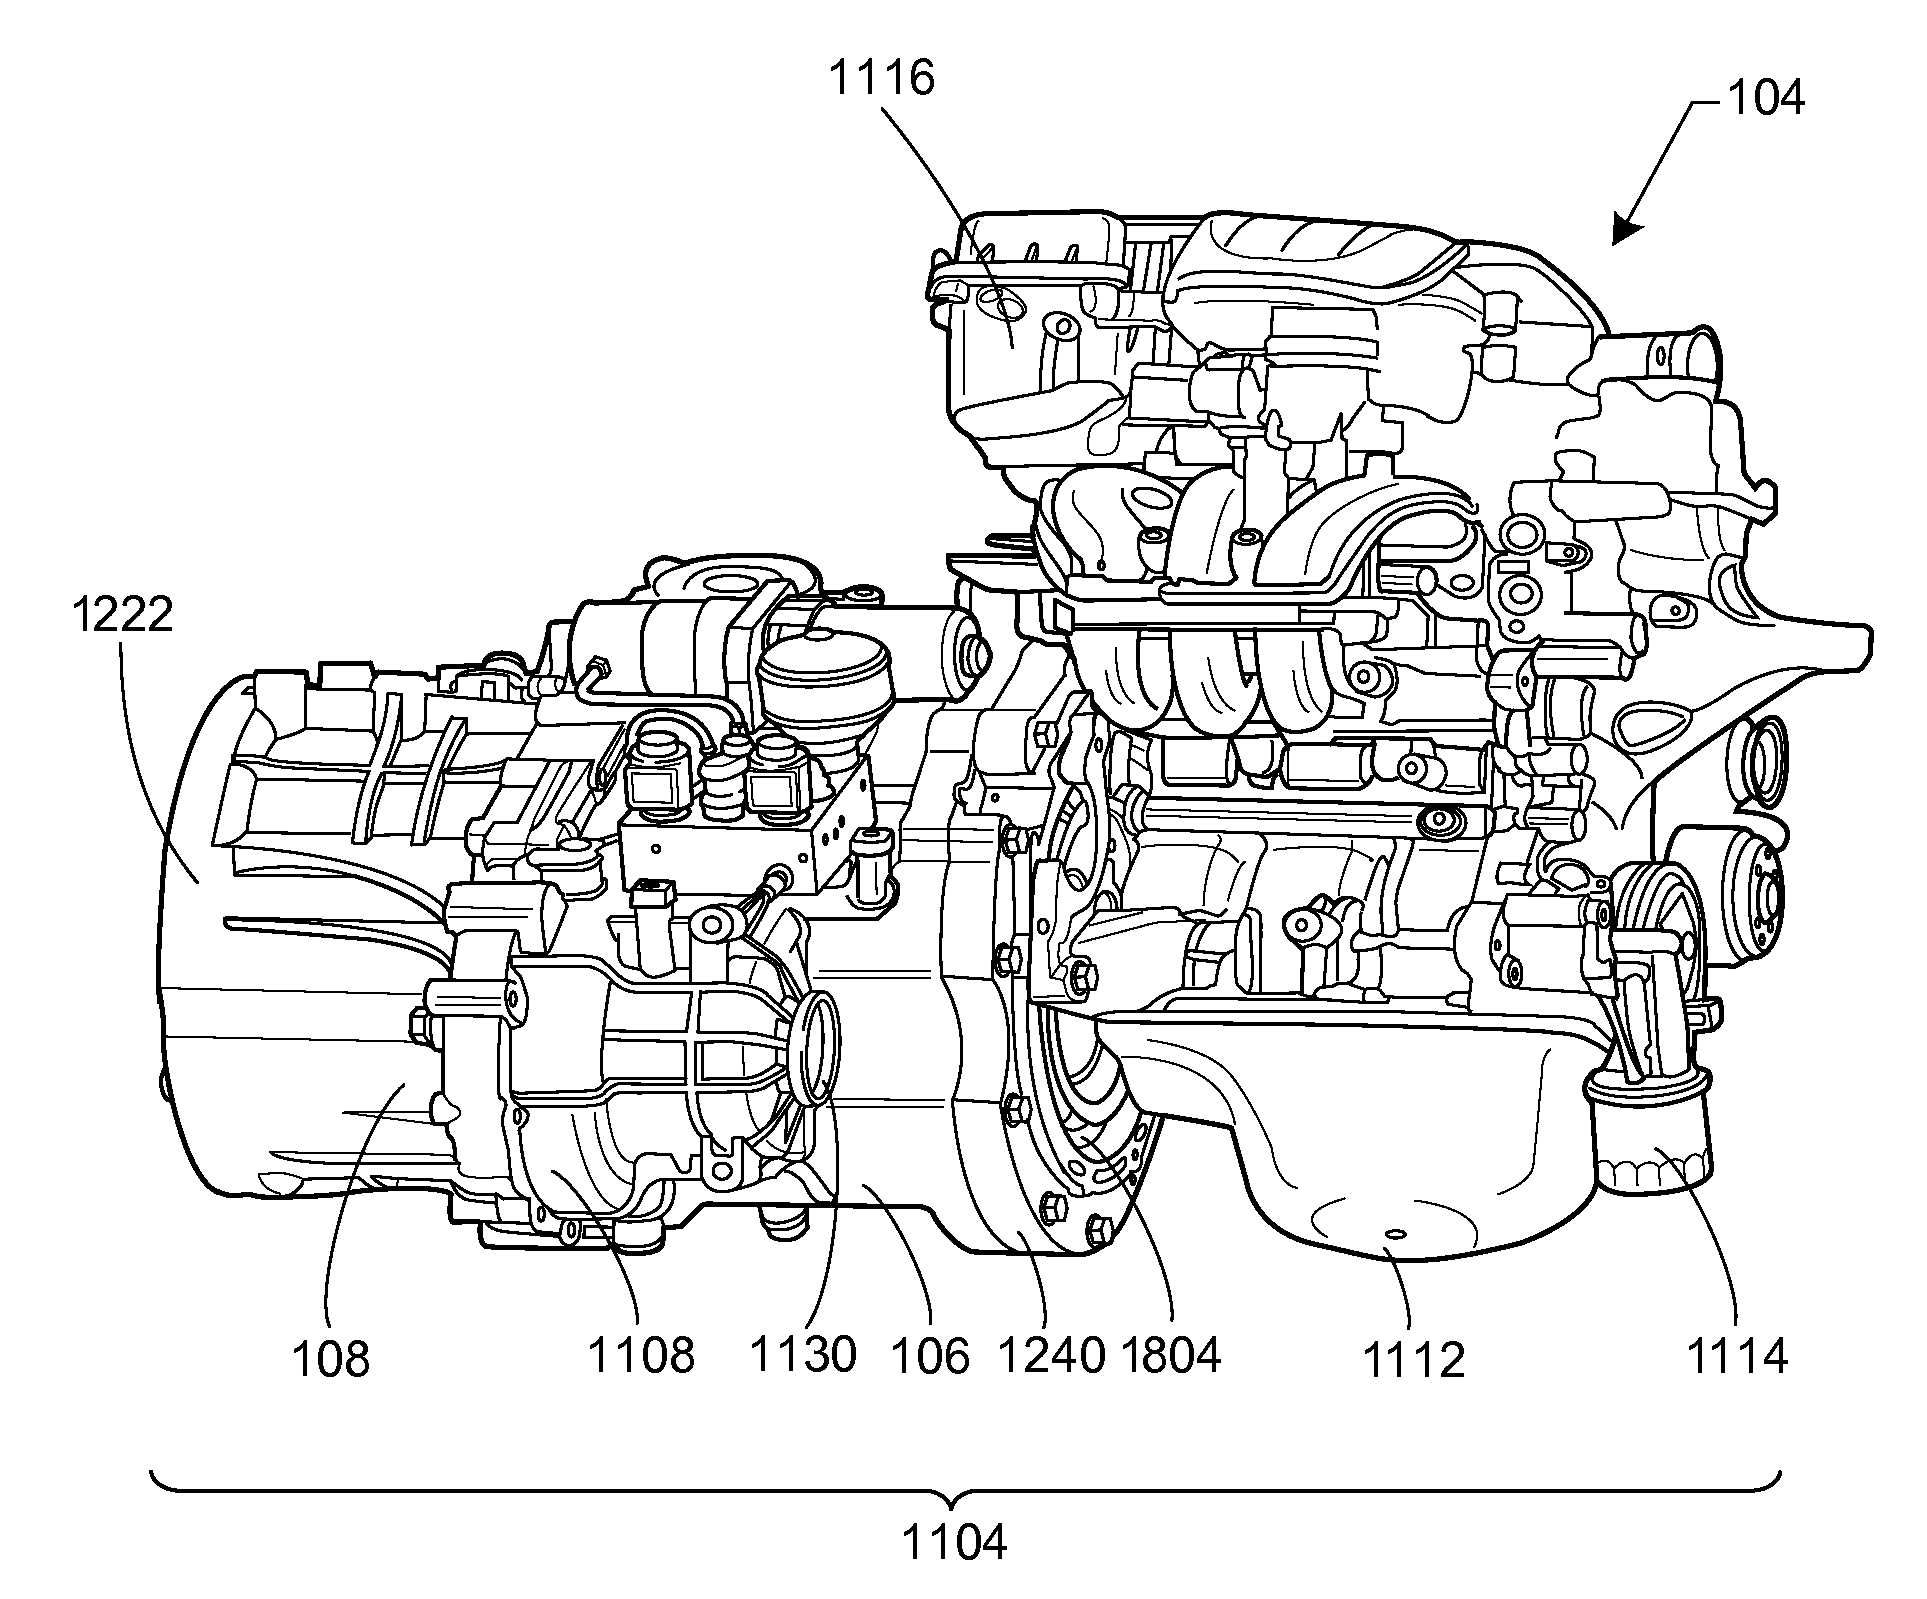 Hybrid Vehicle Having Torsional Coupling Between Engine Assembly And Motor-Generator